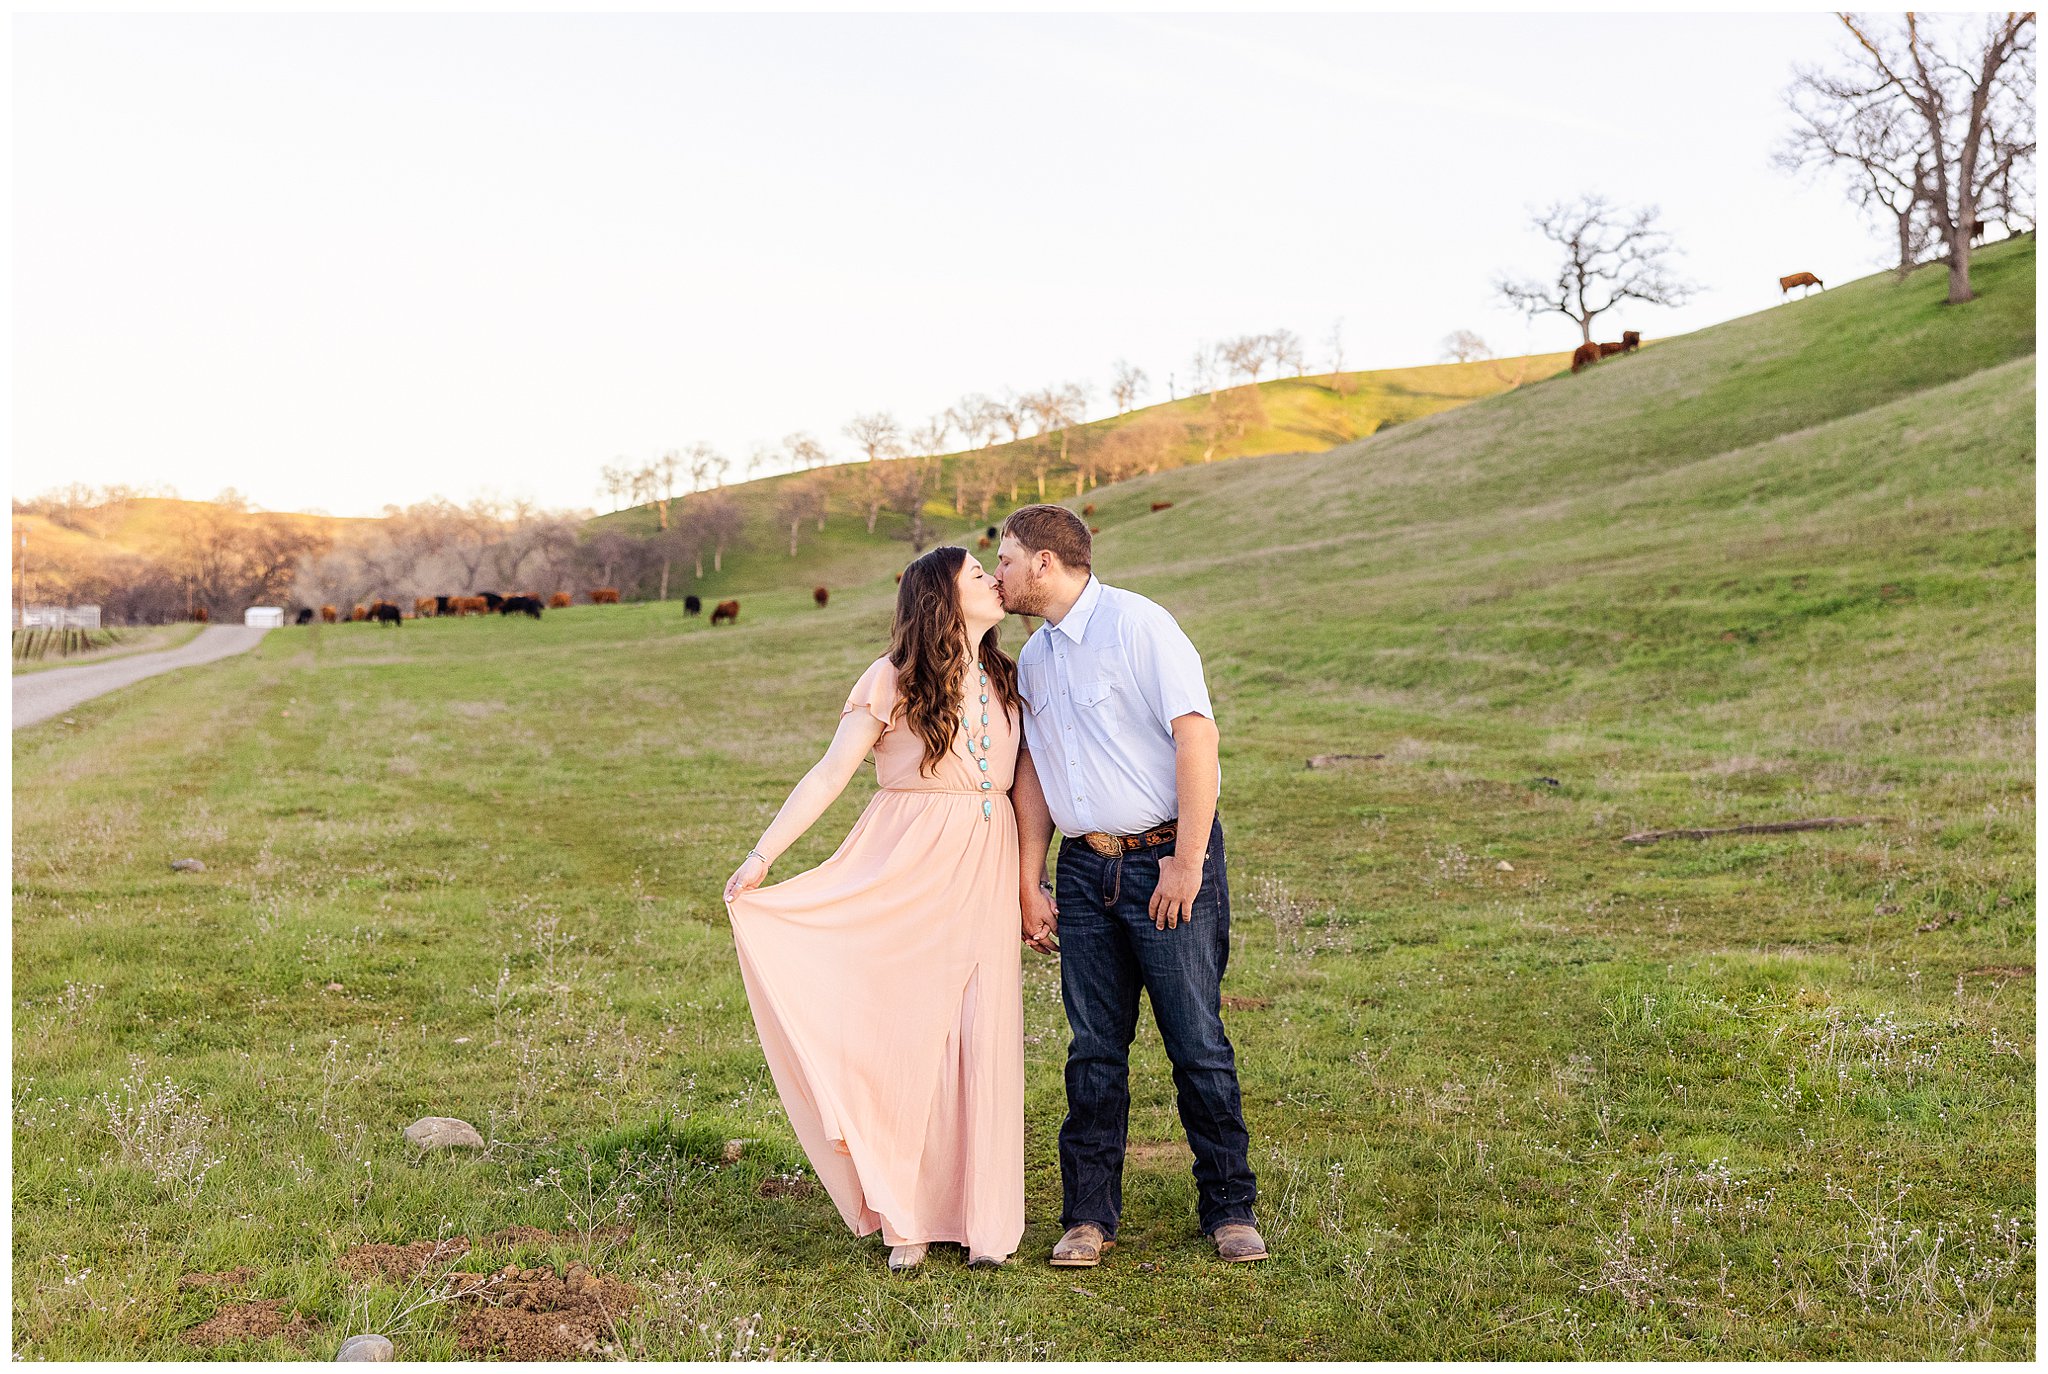 Wheat Field Engagement Session Corning Paskenta Winter January Barn Cattle Rolling Hills Mountains,